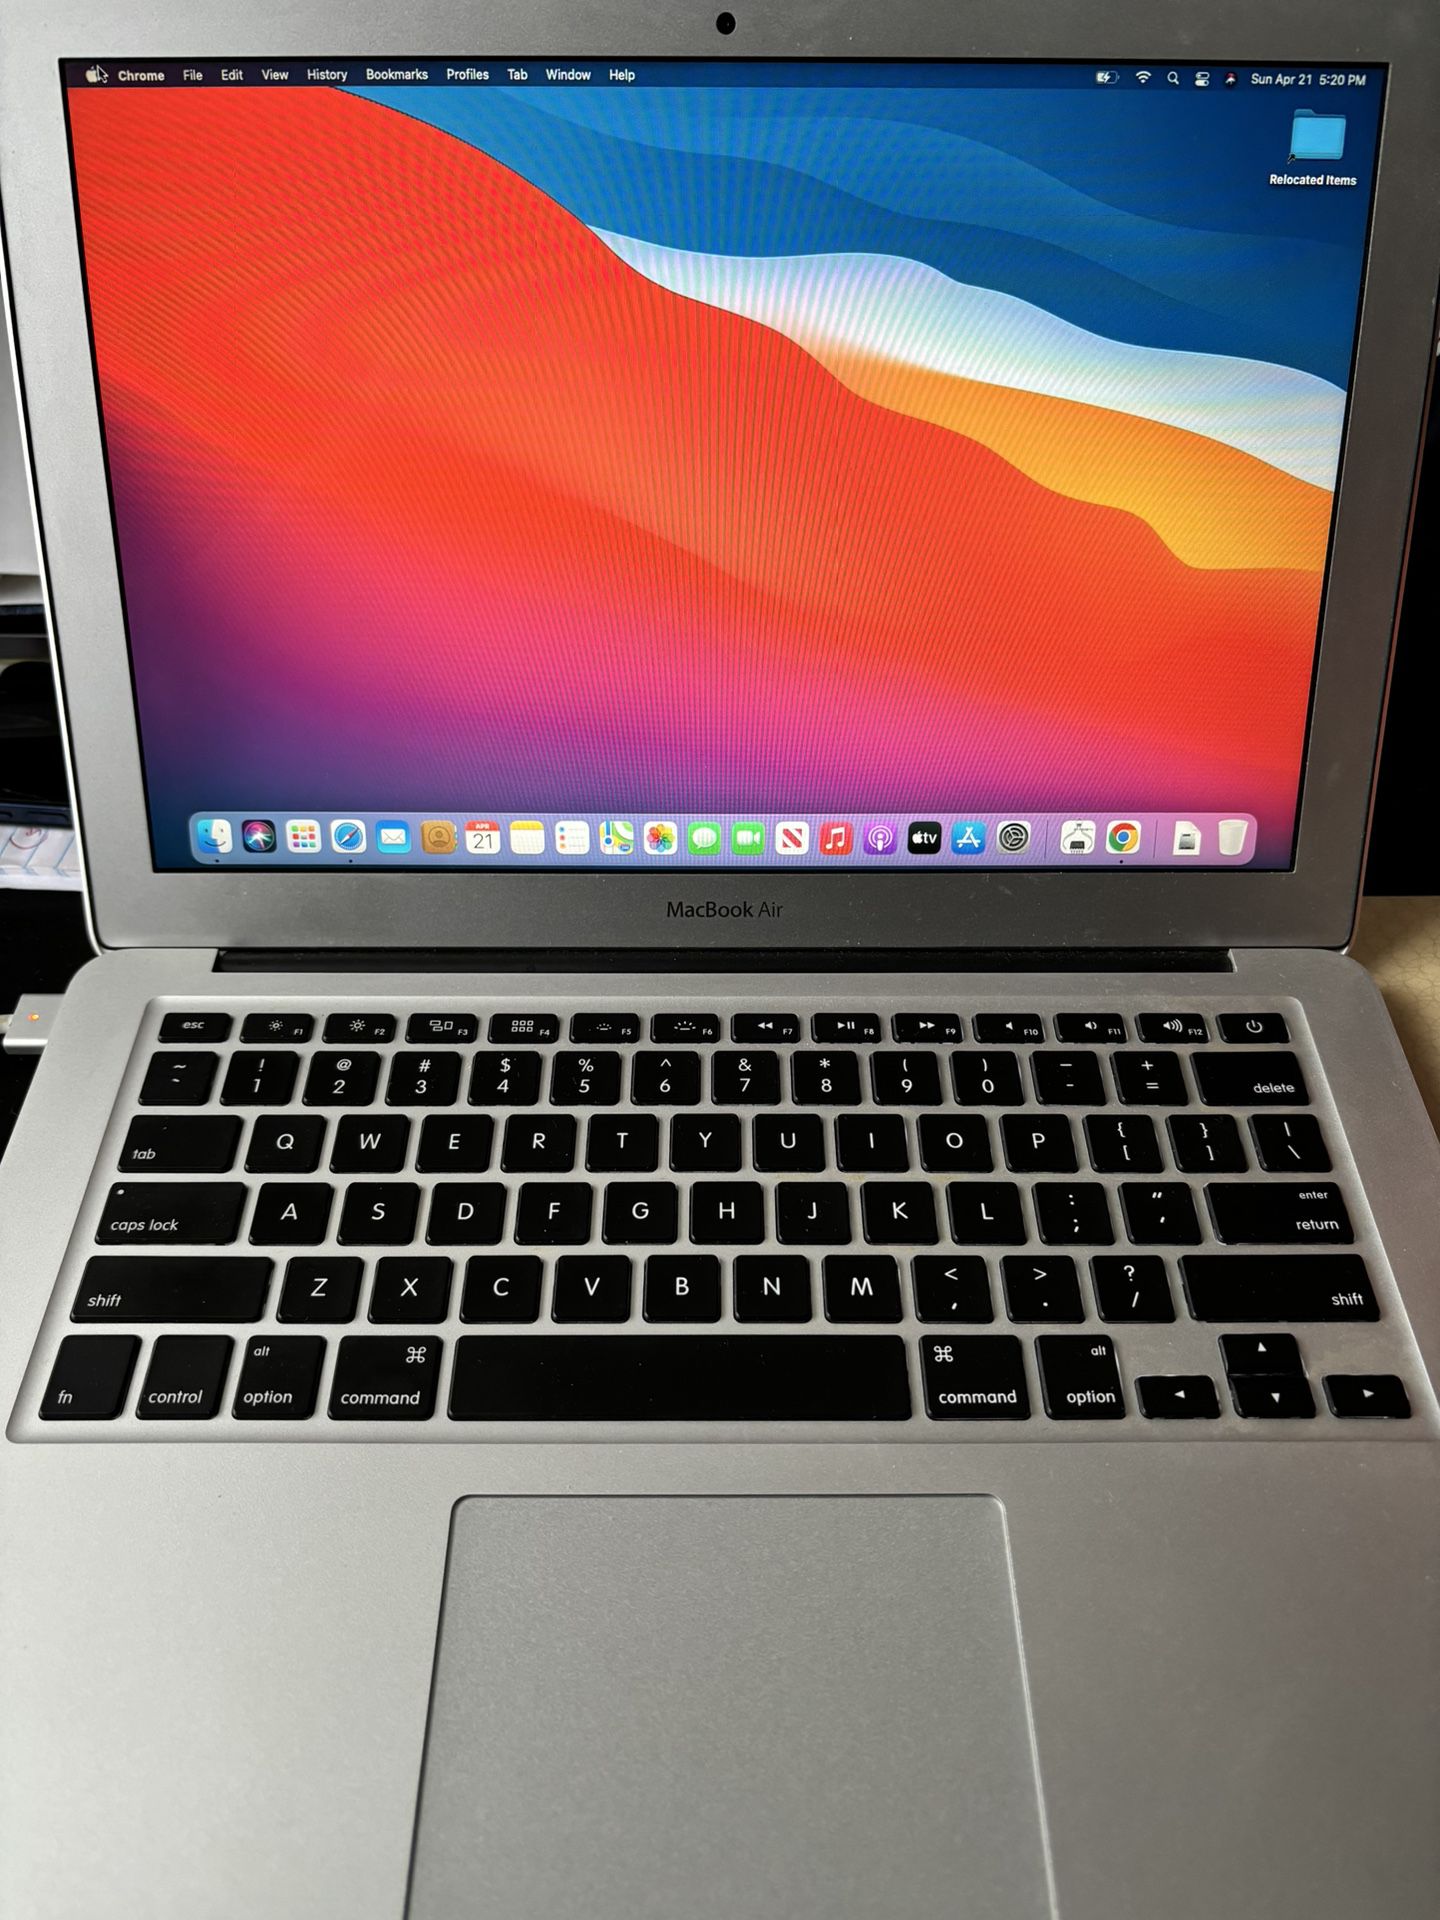 MacBook Air 512 GB 8GB DDR with NEW OS